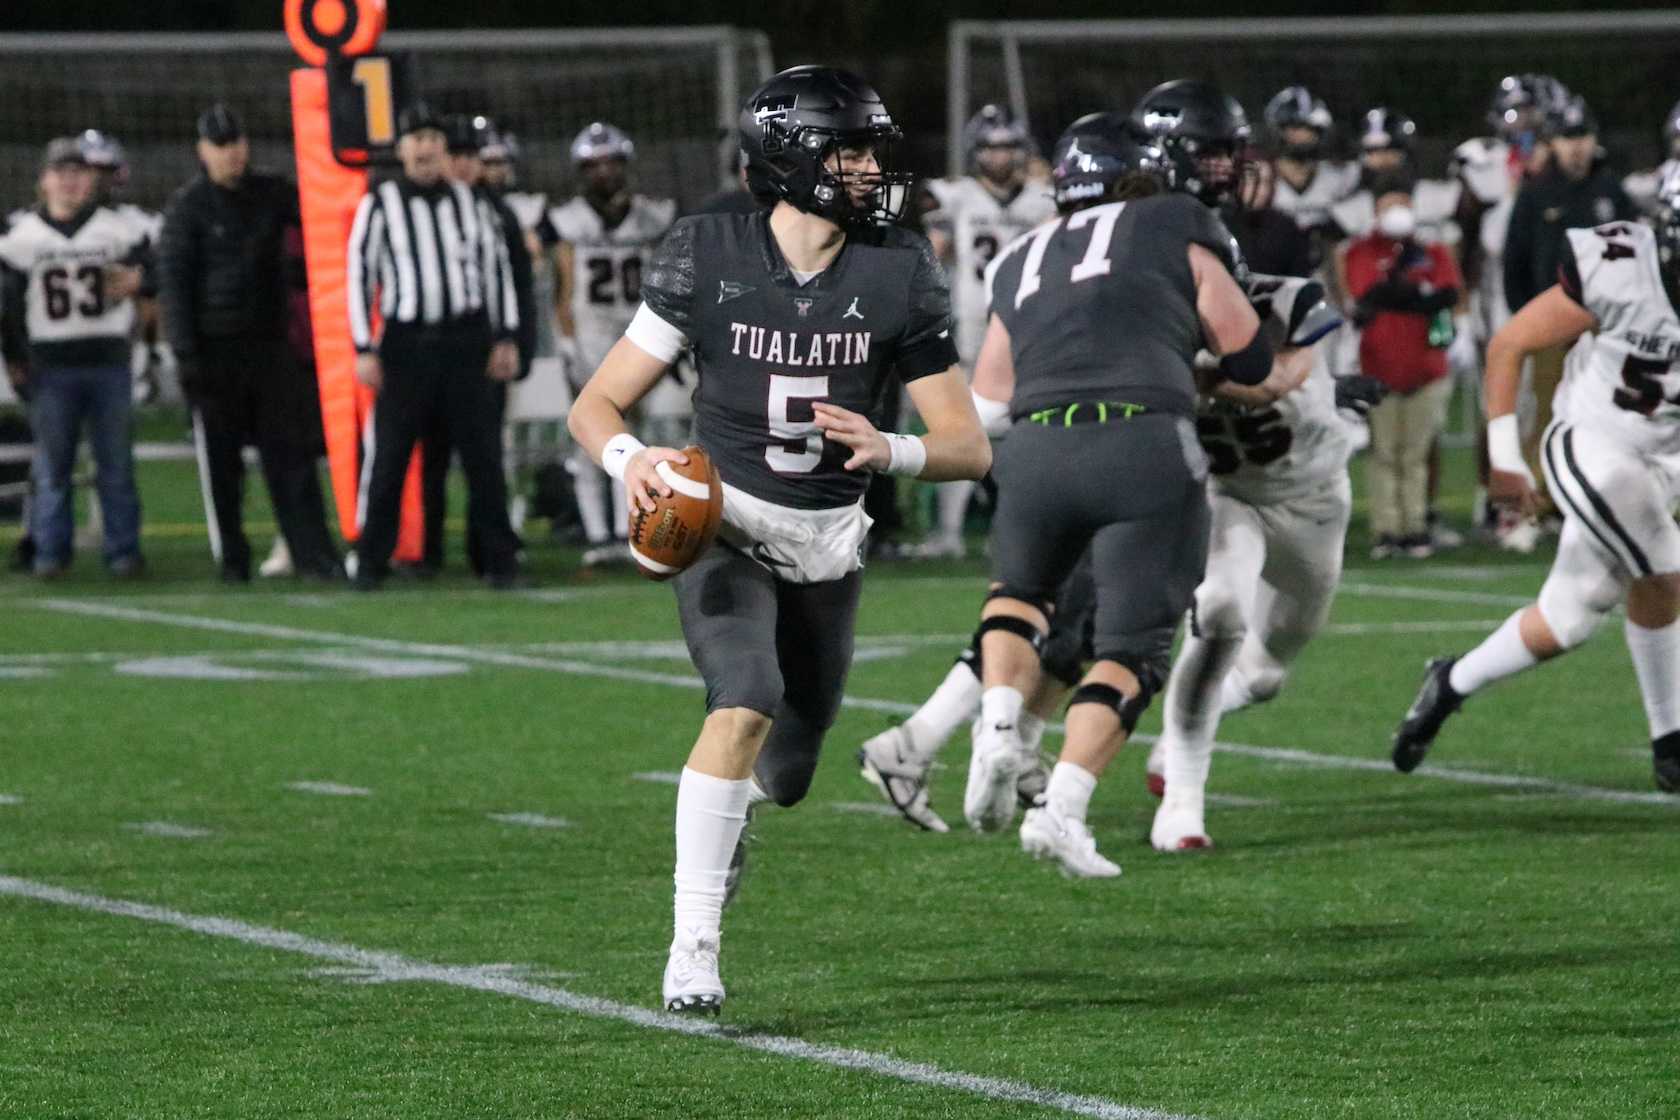 Tualatin QB Nolan Keeney completed 11 of 15 passes for 408 yards and six touchdowns Friday. (Photo by Jim Beseda)